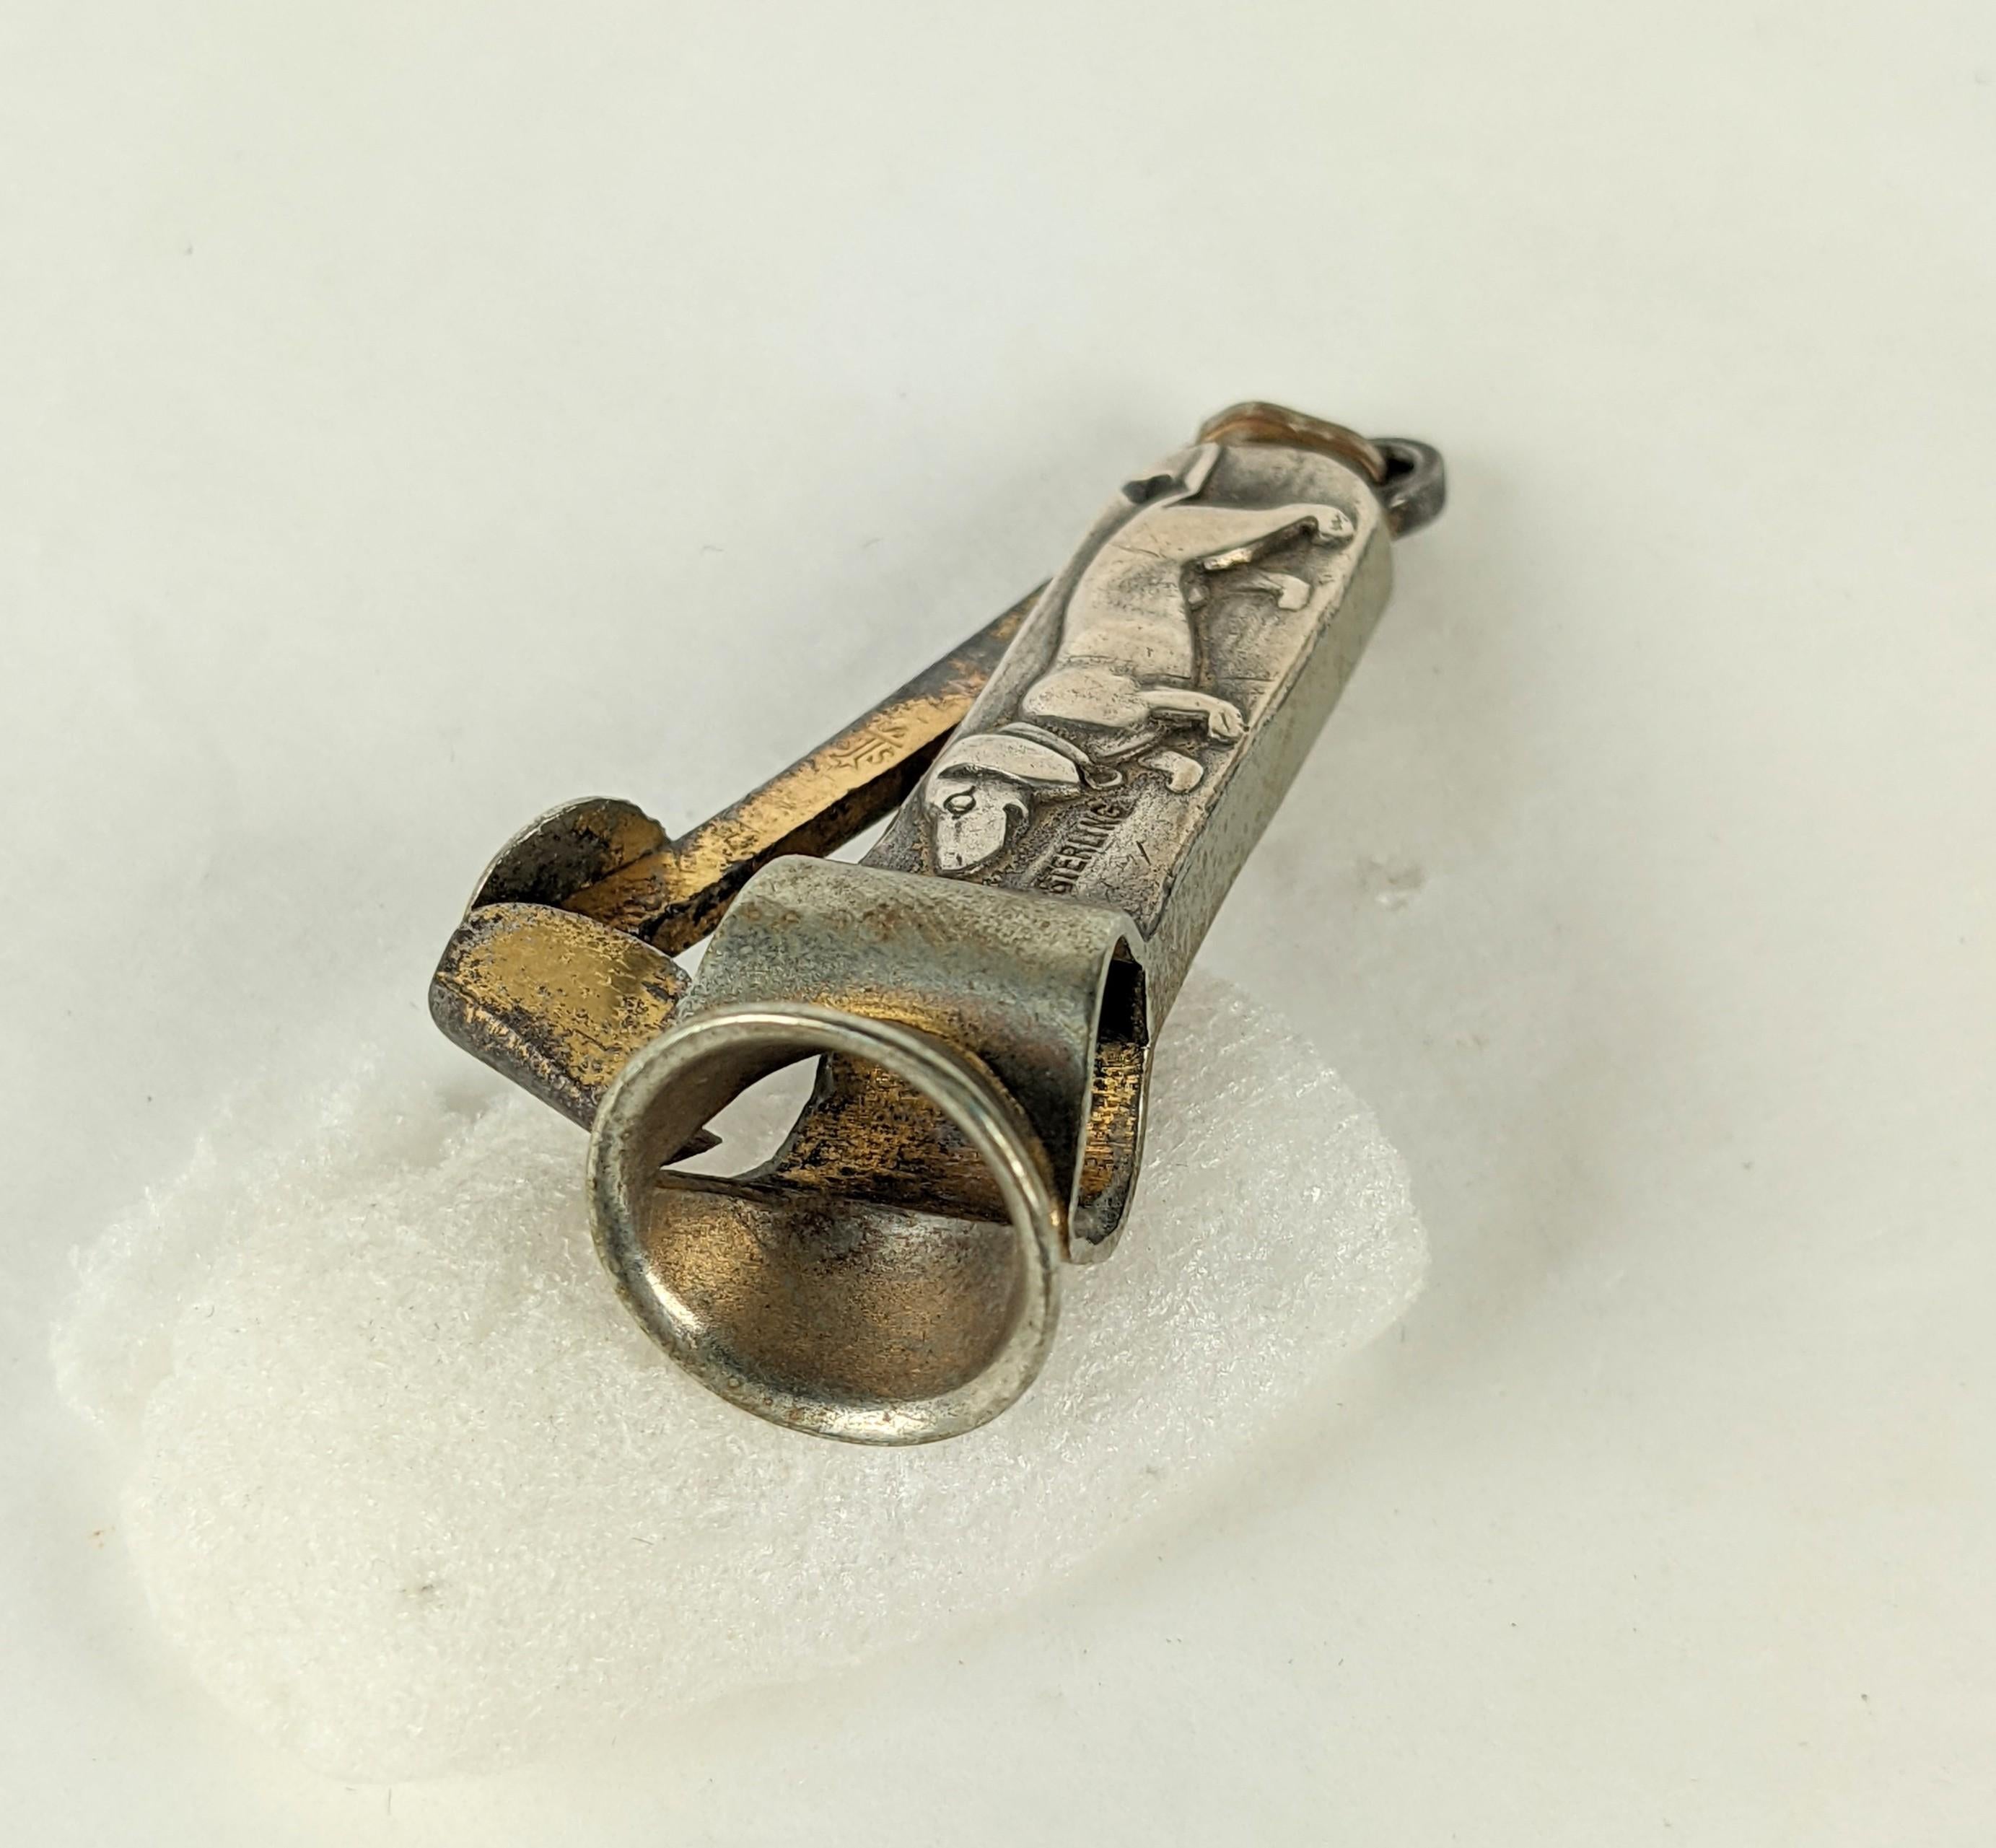 Charming Art Deco Sterling Daschund Cigarette/Cigar Cutter. Mechanism is clad in sterling silver with dog motif, with brass bale. Works well as a pendant as well.
1930's USA. Measures 2